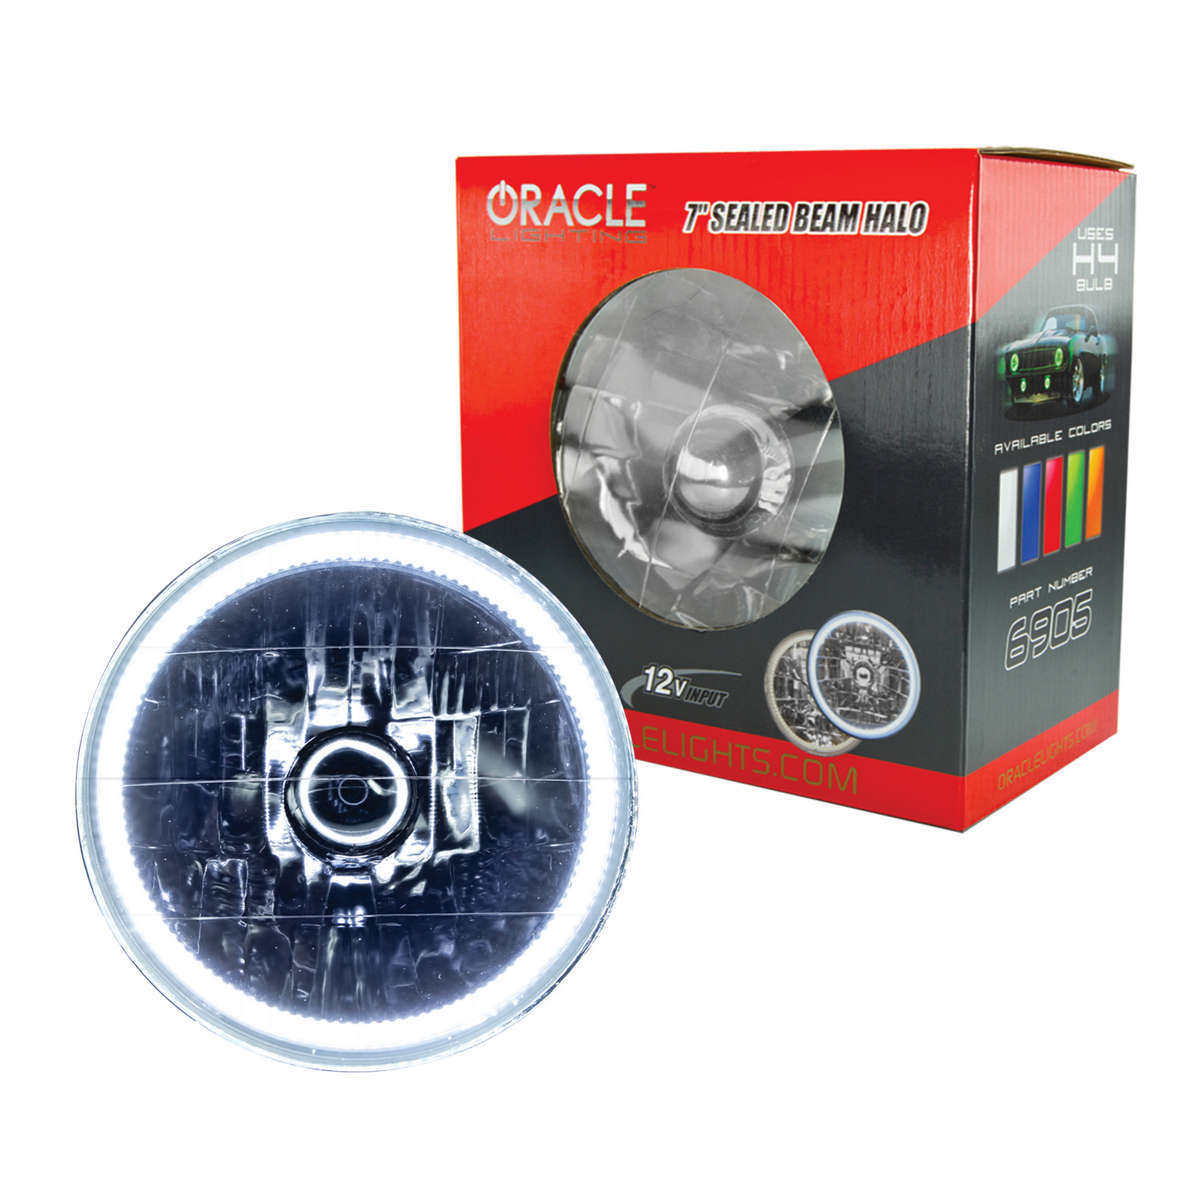 Oracle Headlight,  Sealed Beam,  7" OD,  Halo LED Ring,  Requires H4 Bulb,  Glass/Plastic,  White,  Universal,  Each